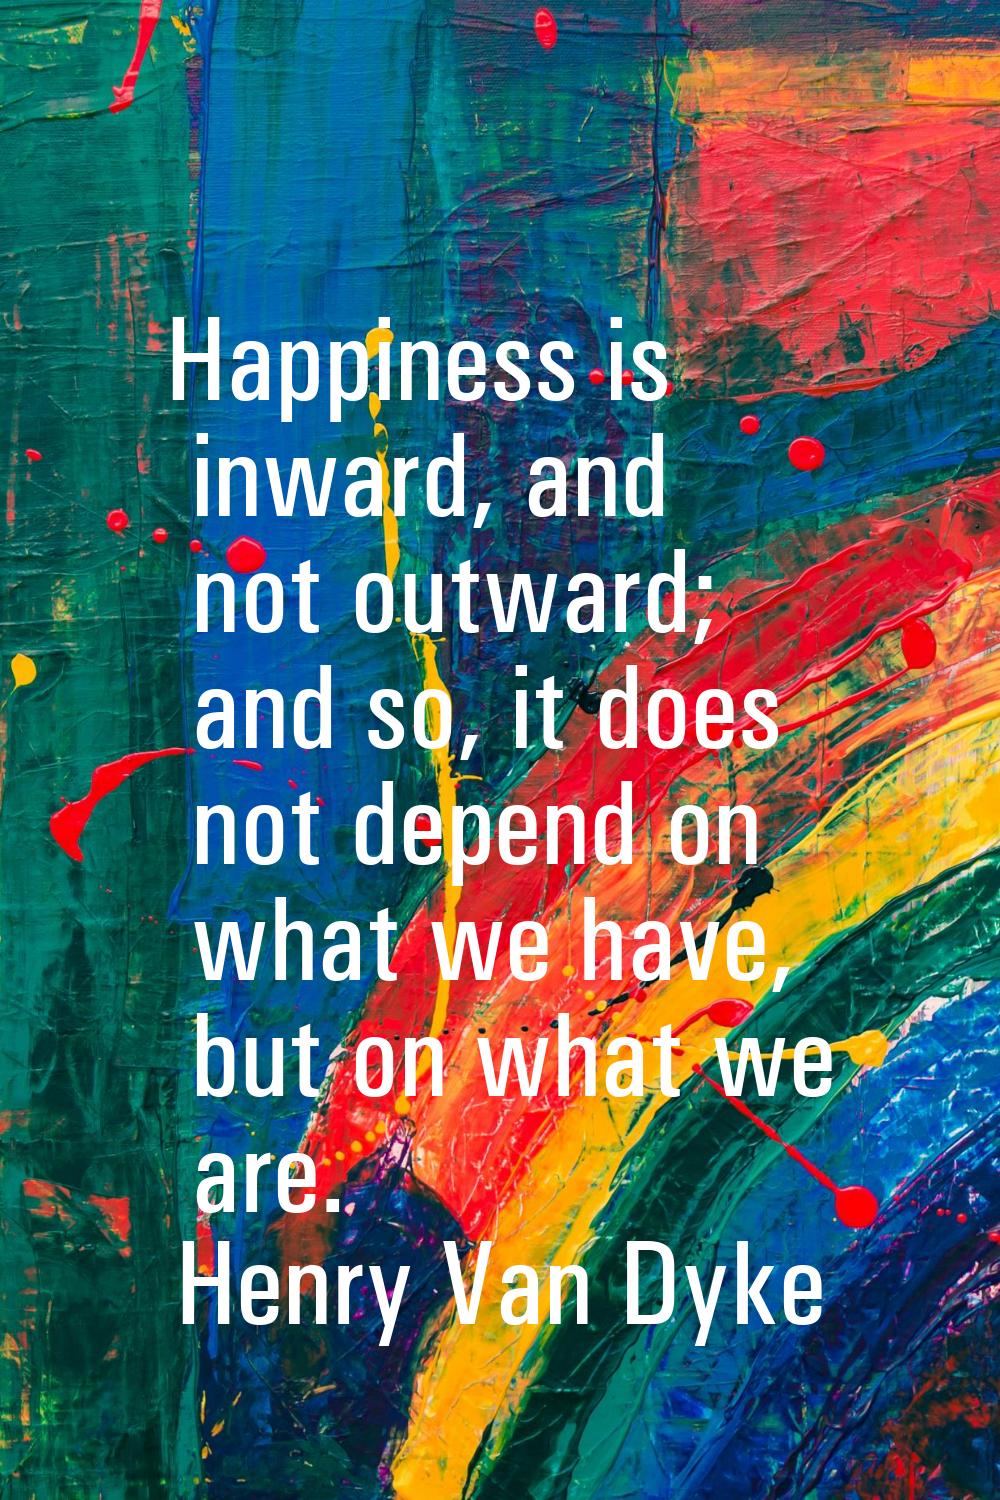 Happiness is inward, and not outward; and so, it does not depend on what we have, but on what we ar